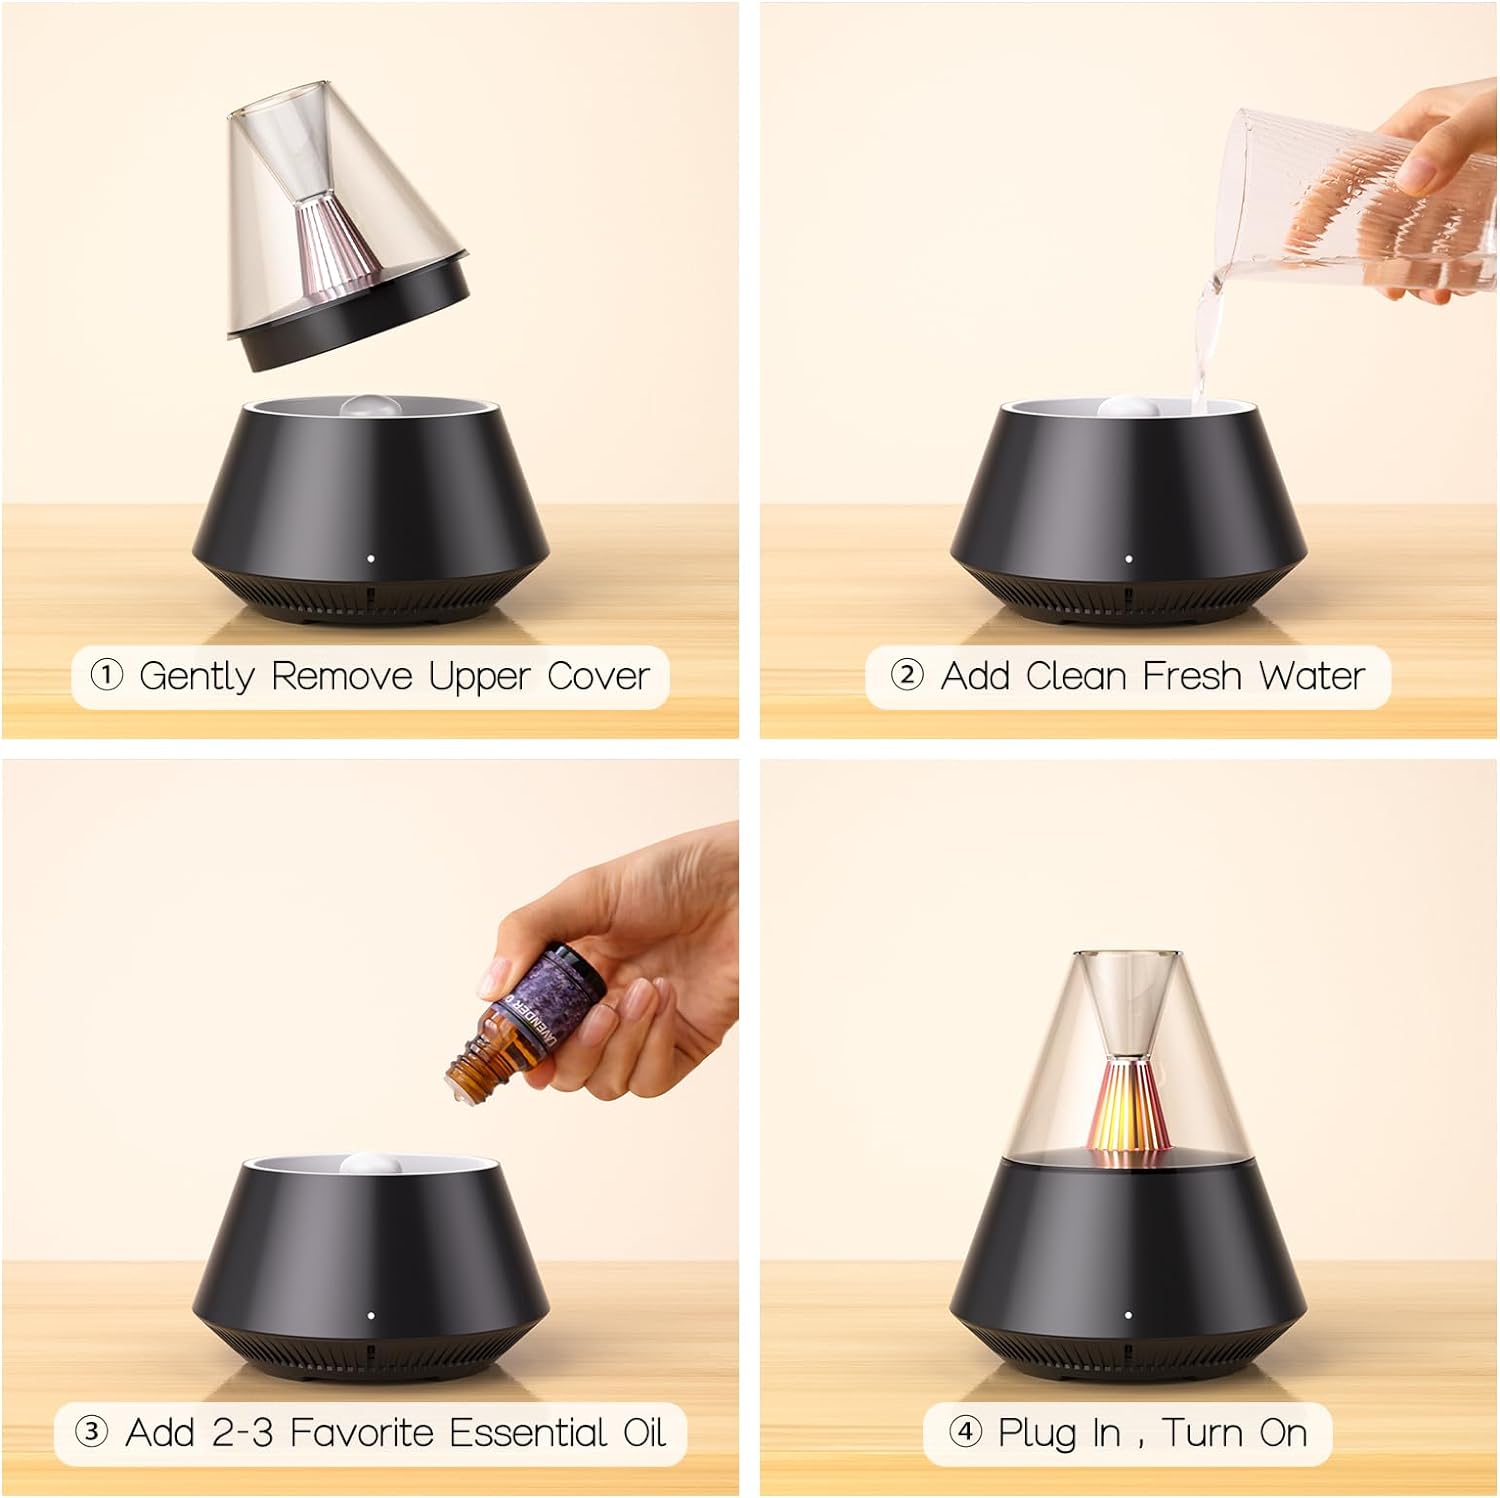 Step-by-step instructions for using an Essential Oil Diffuser SpyCam: 1. remove the top, 2. pour in water, 3. add essential oils, 4. plug in